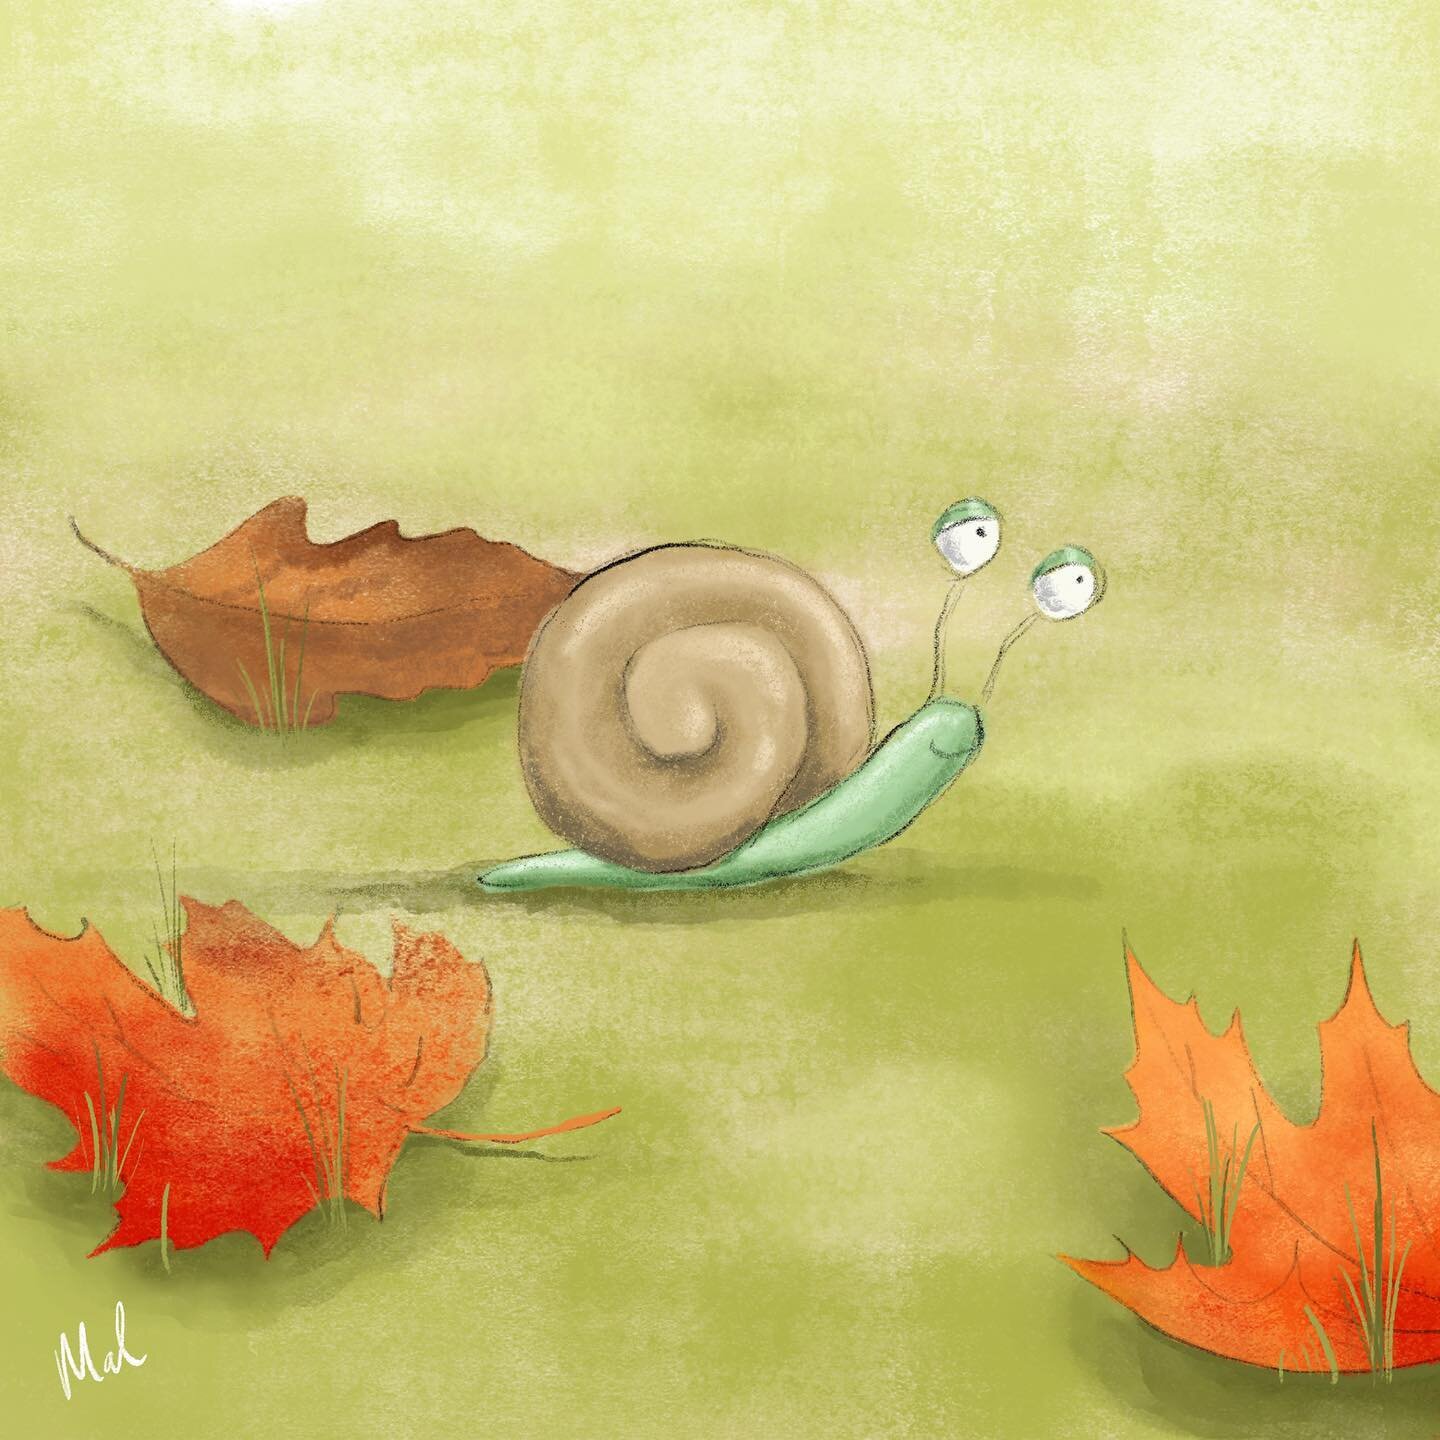 Well, that&rsquo;s another term done and dusted, thank goodness! Time now for rest, enjoying a hot cross bun and coffee in the sun, autumn leaves and of course a bit of doodling ✏️🐌🍁

#kidlitart #illustration #autumn